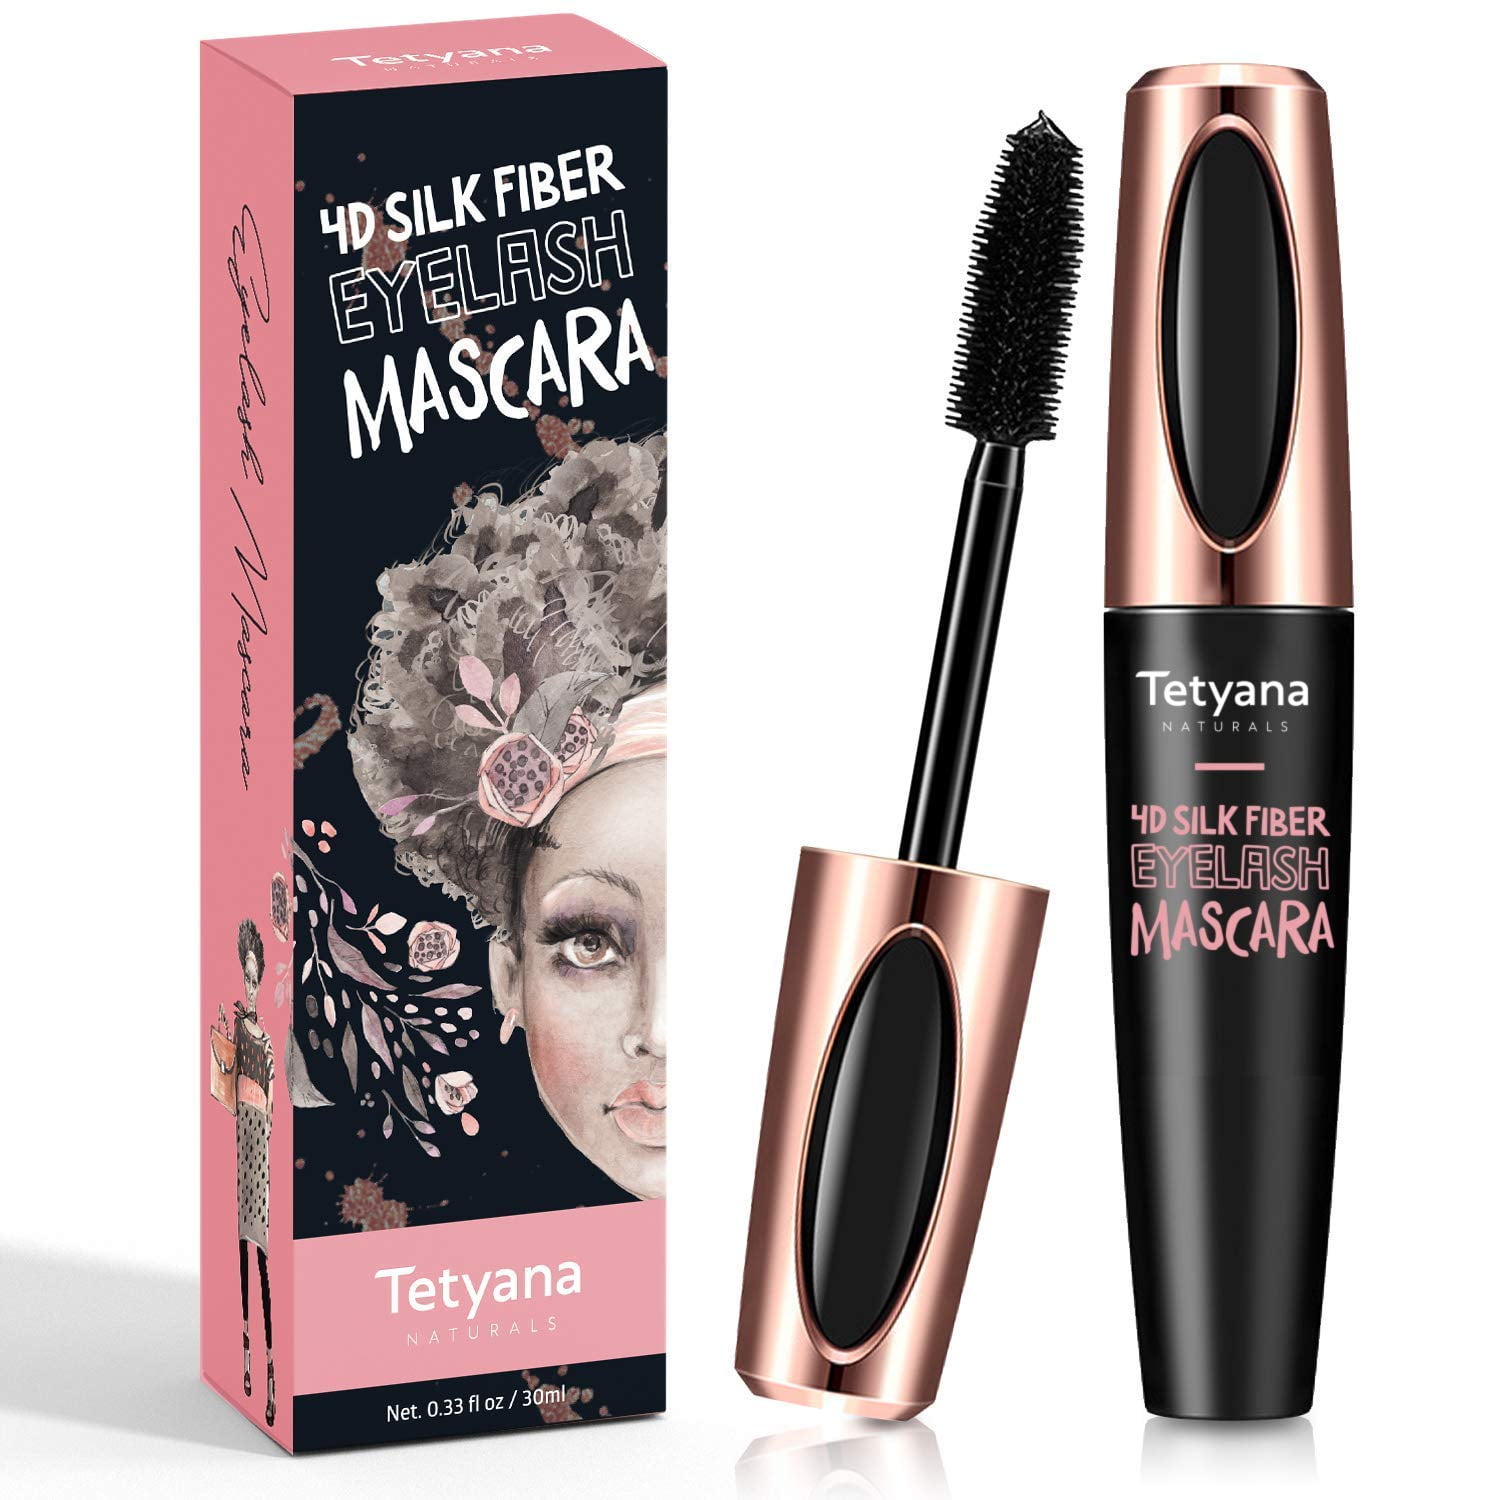 Tetyana Naturals Natural 4D Silk Fiber Lash Mascara, Lengthening and Long Lasting, Waterproof & Smudge-Proof, All Day Exquisitely Lush, Full, Thick, Smudge-Proof Eyelashes Walmart.com